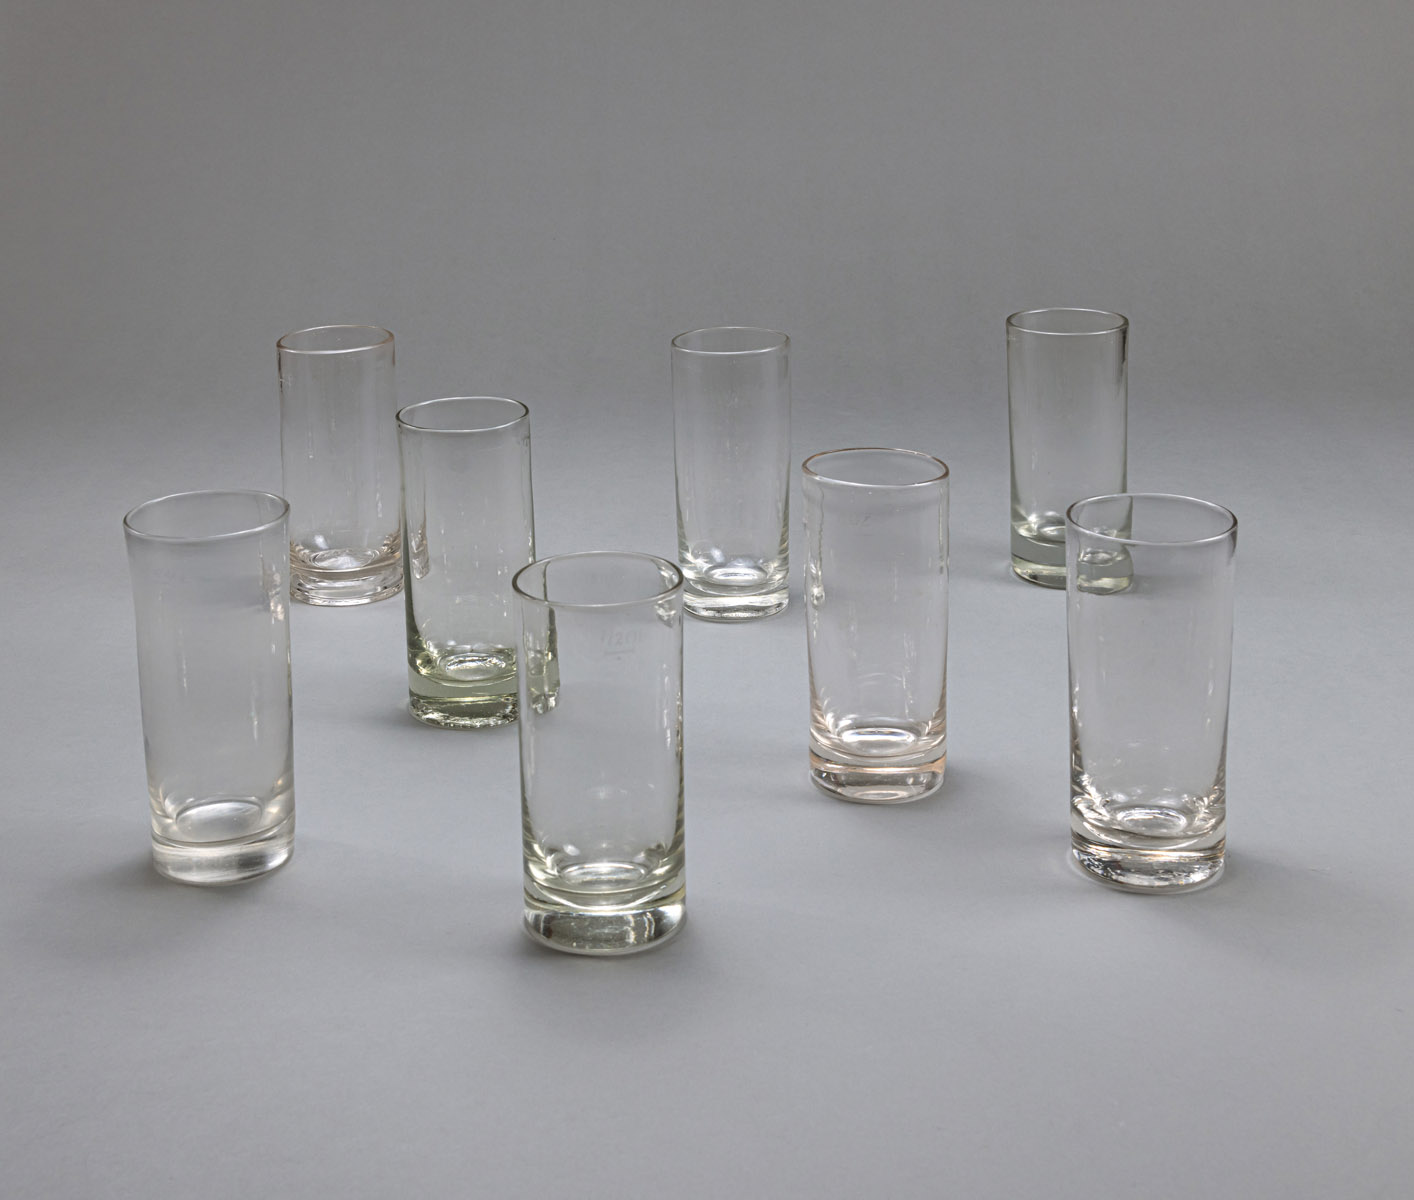 <b>EIGHT WATER OR CIDER GLASSES</b>